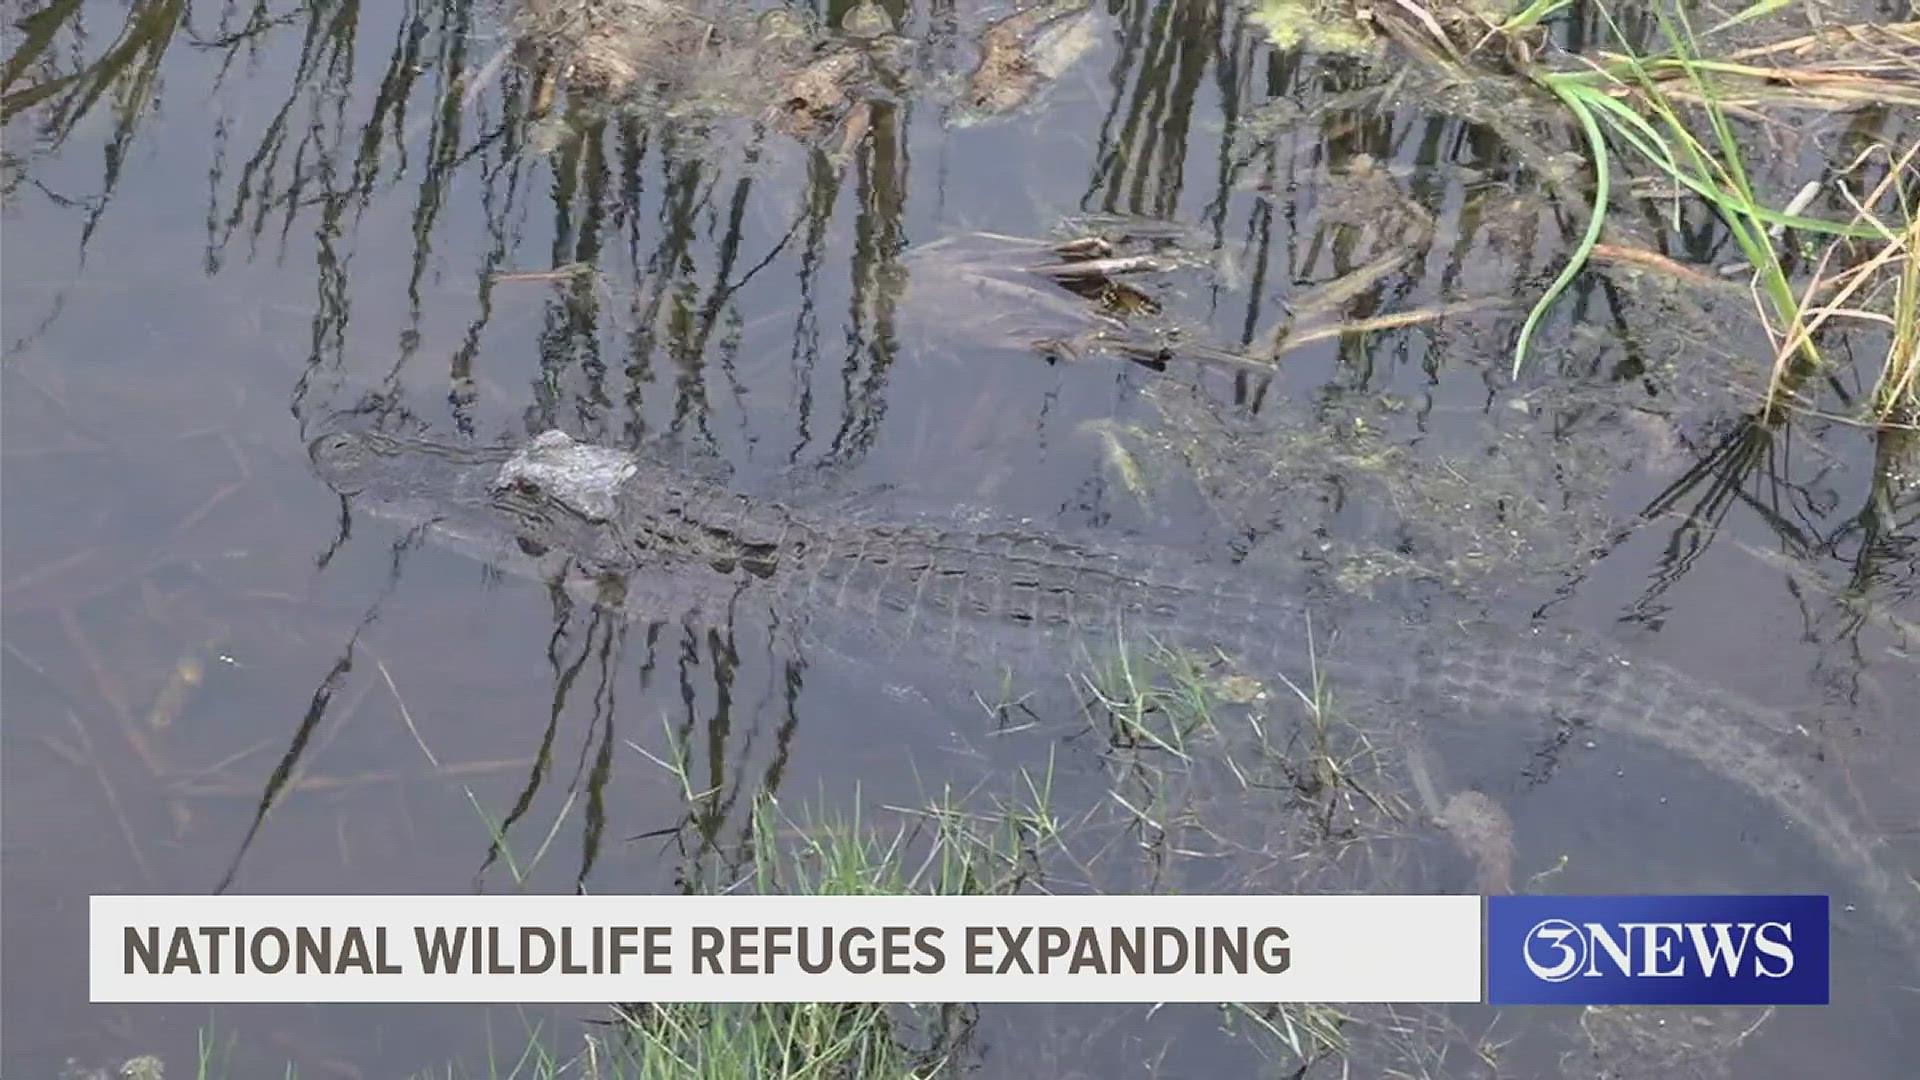 The Department of the Interior announced Tuesday the expansion of four existing national wildlife refuge locations to help conserve habitats and protect species.